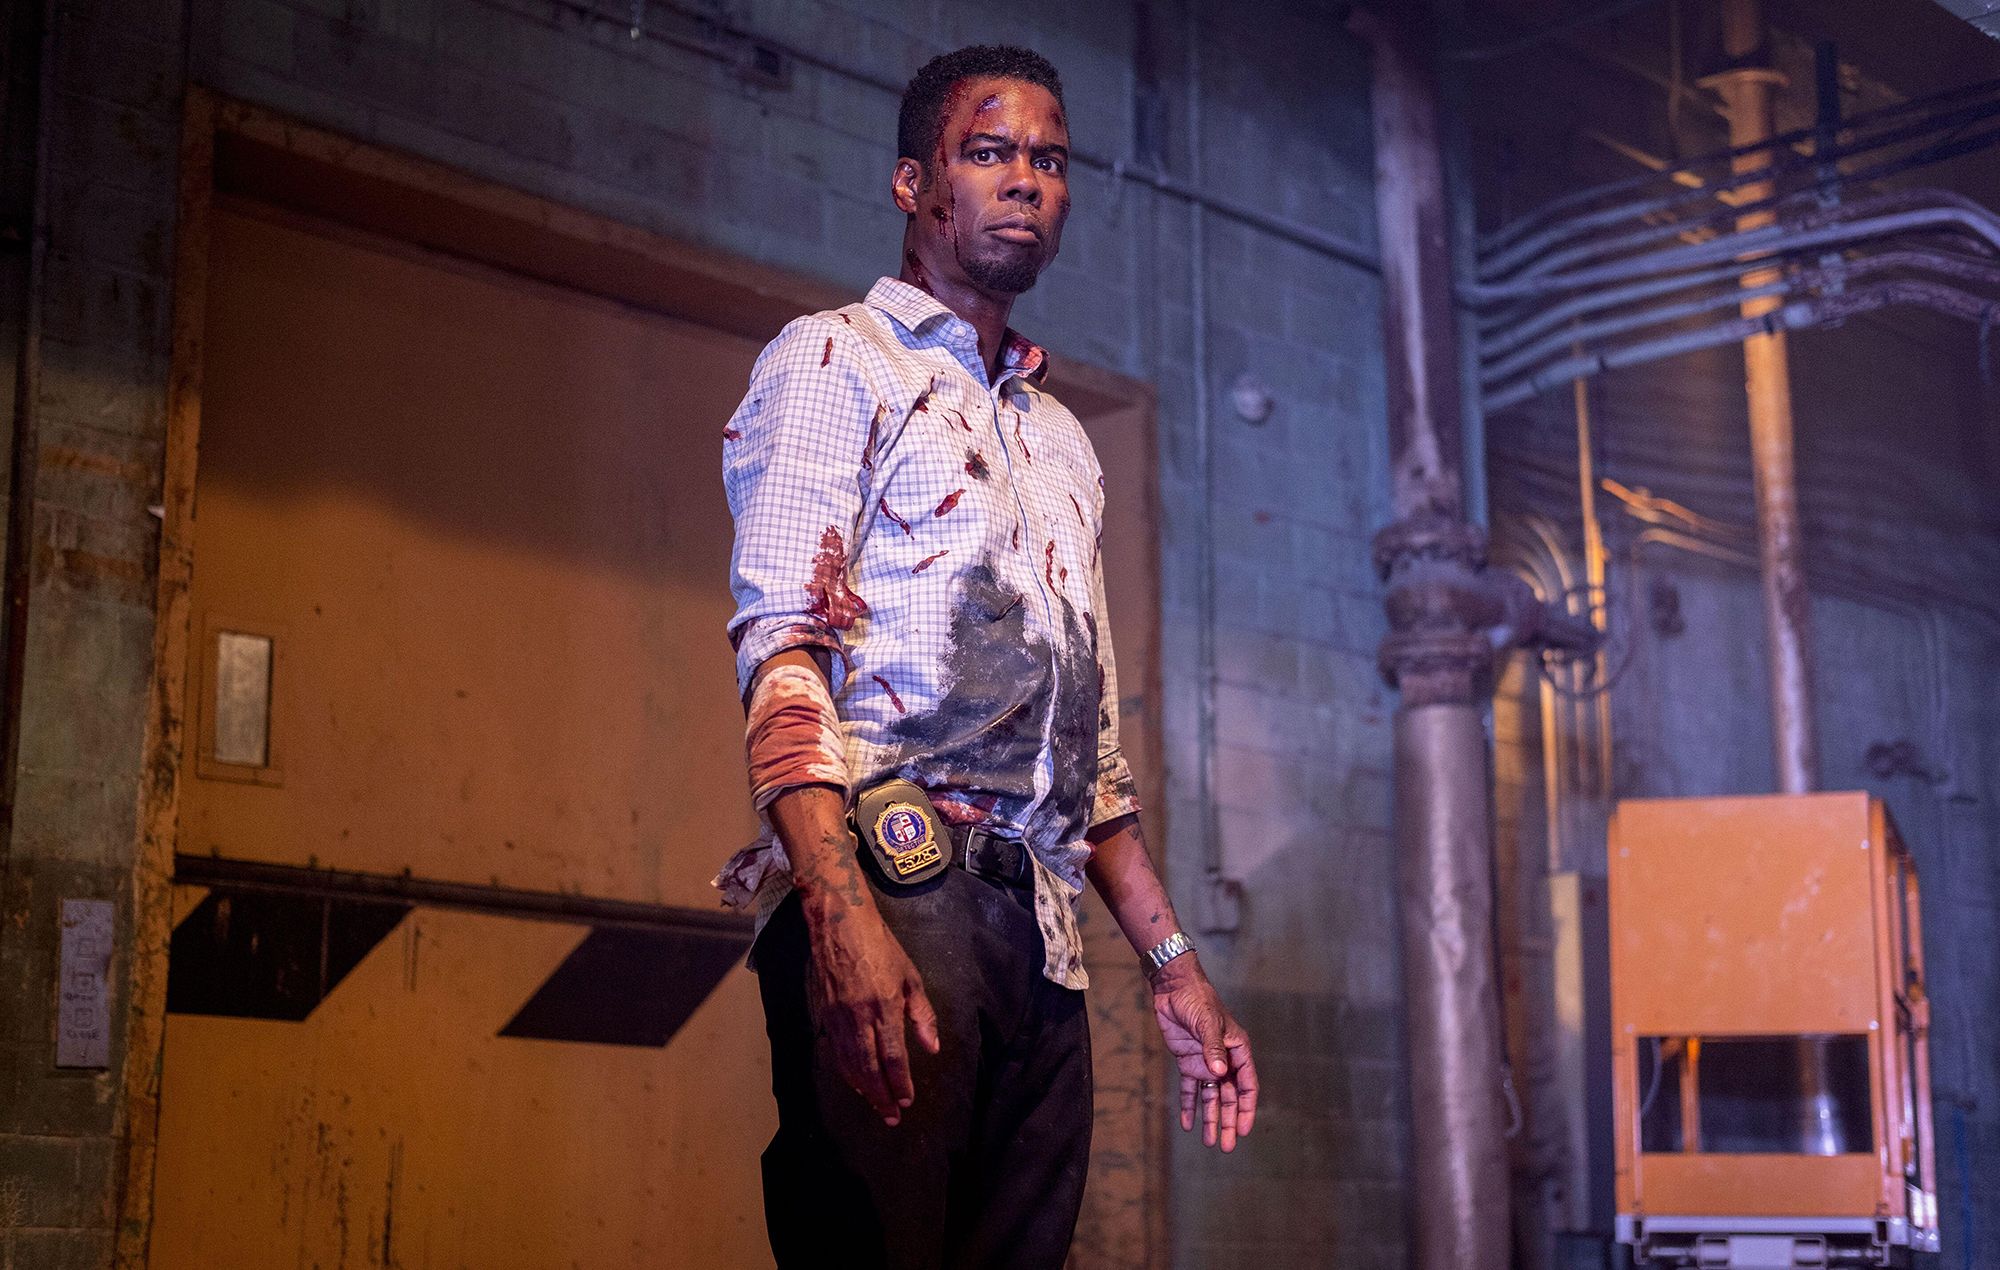 Spiral Tempts Chris Rock in New Image from Saw Sequel